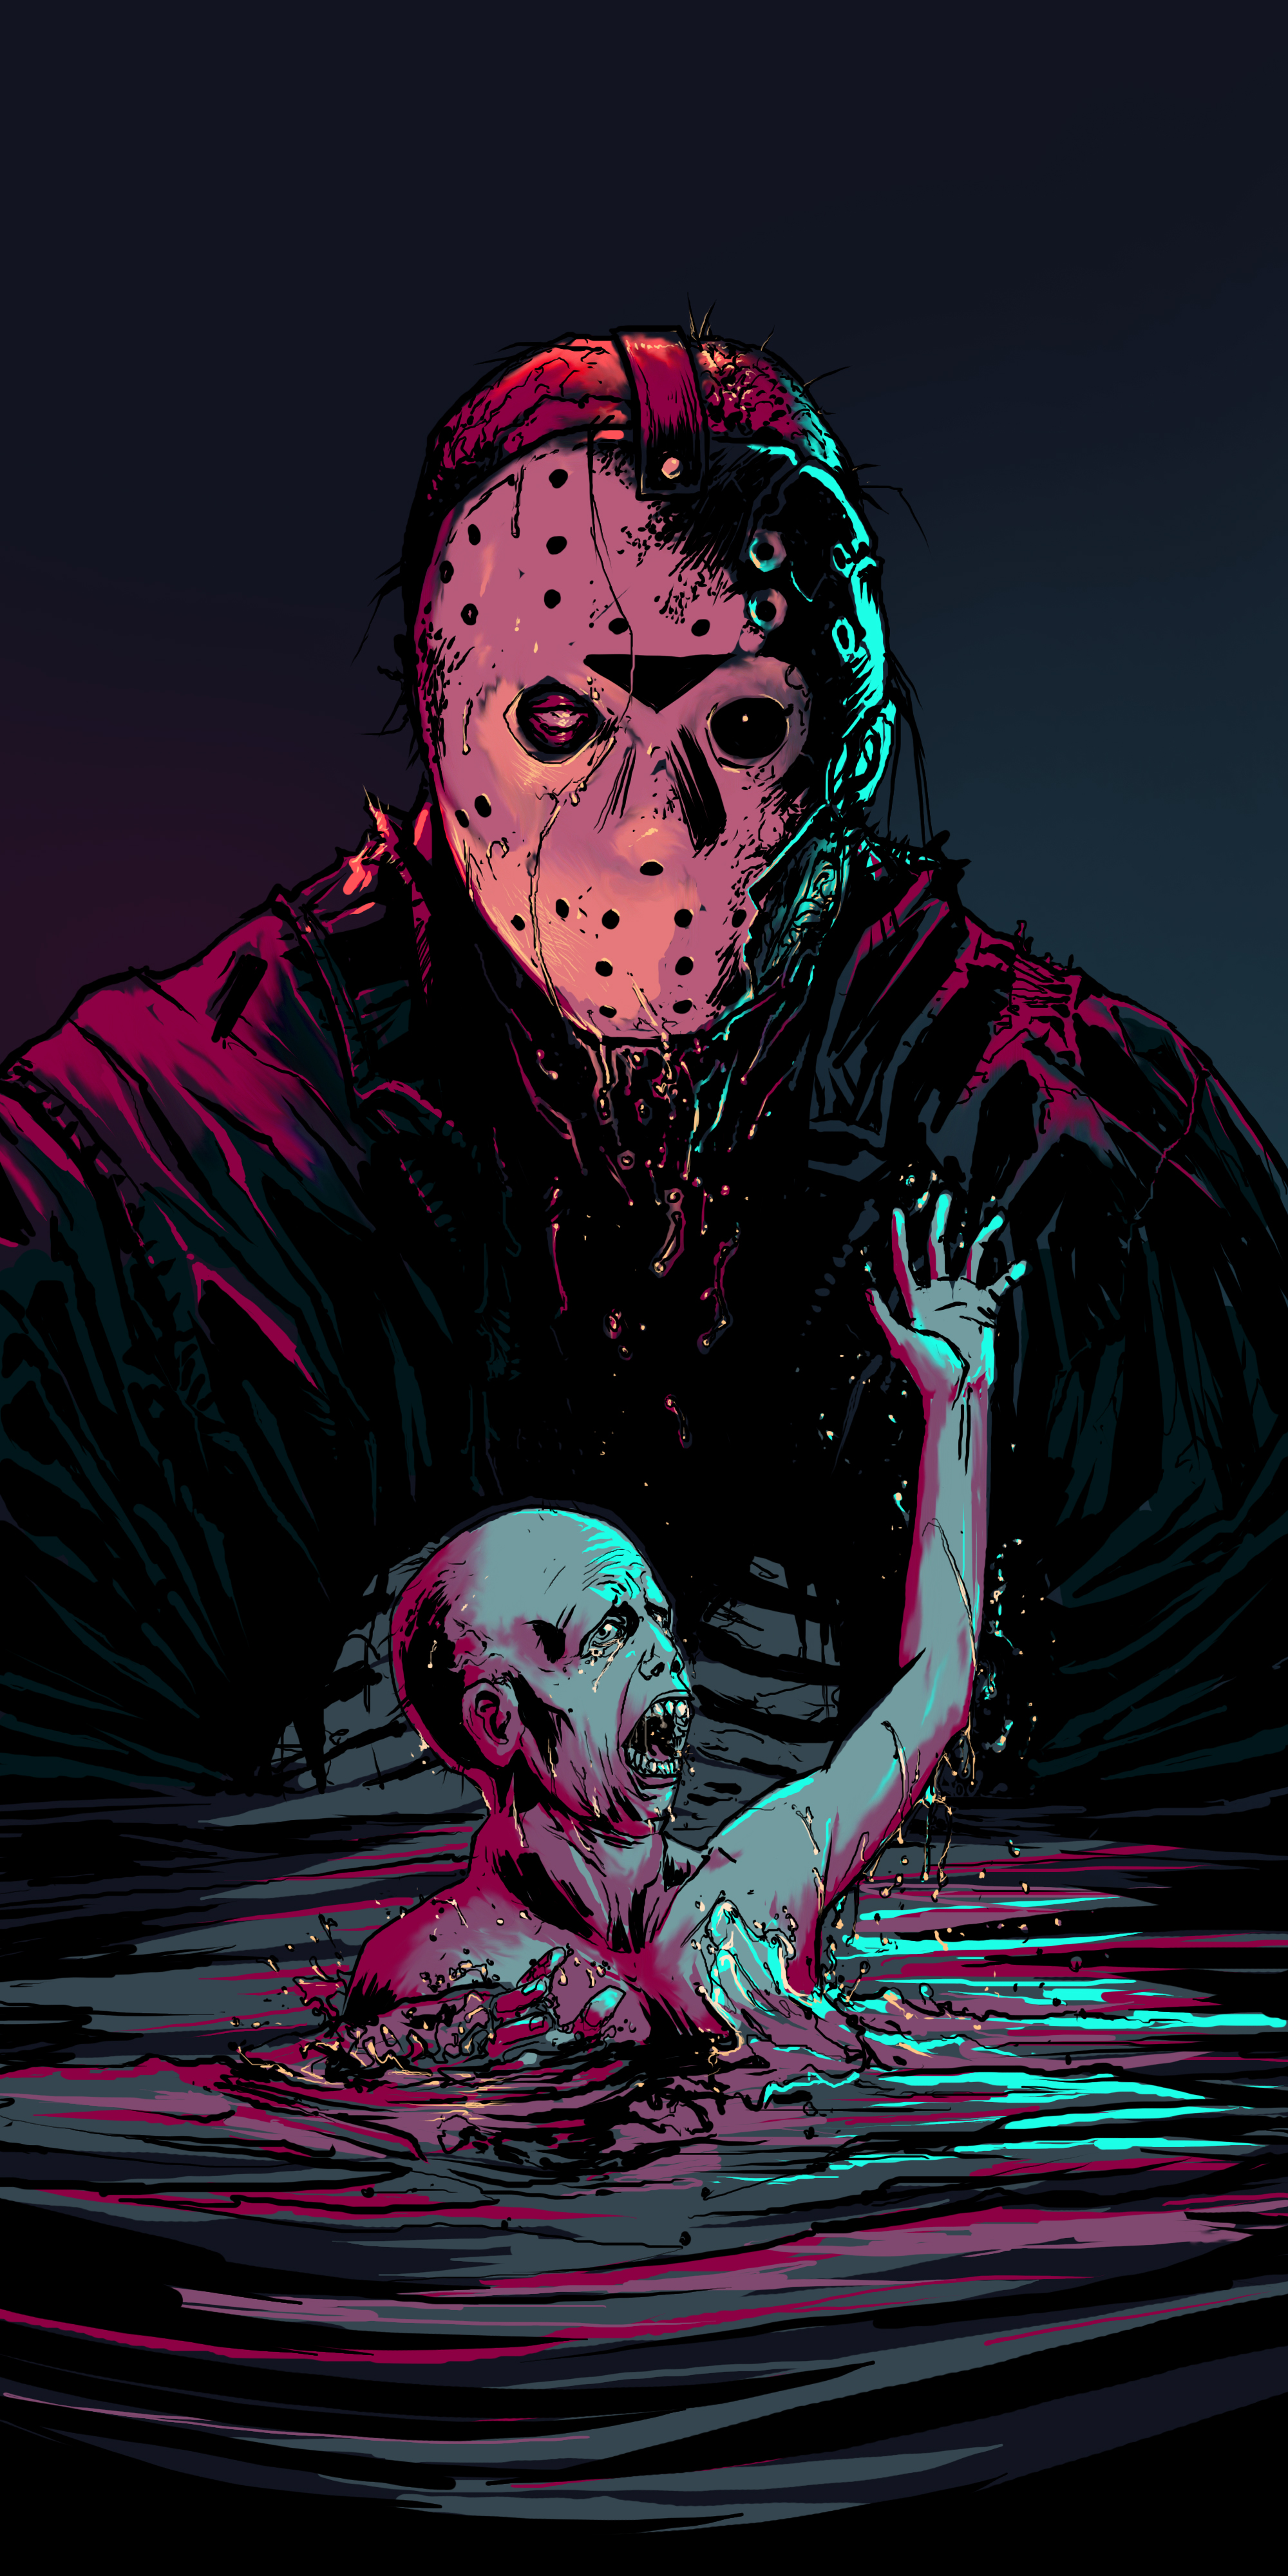 Jason Saves A Child From Drowning And Adopts Him #jason #fridaythe13th